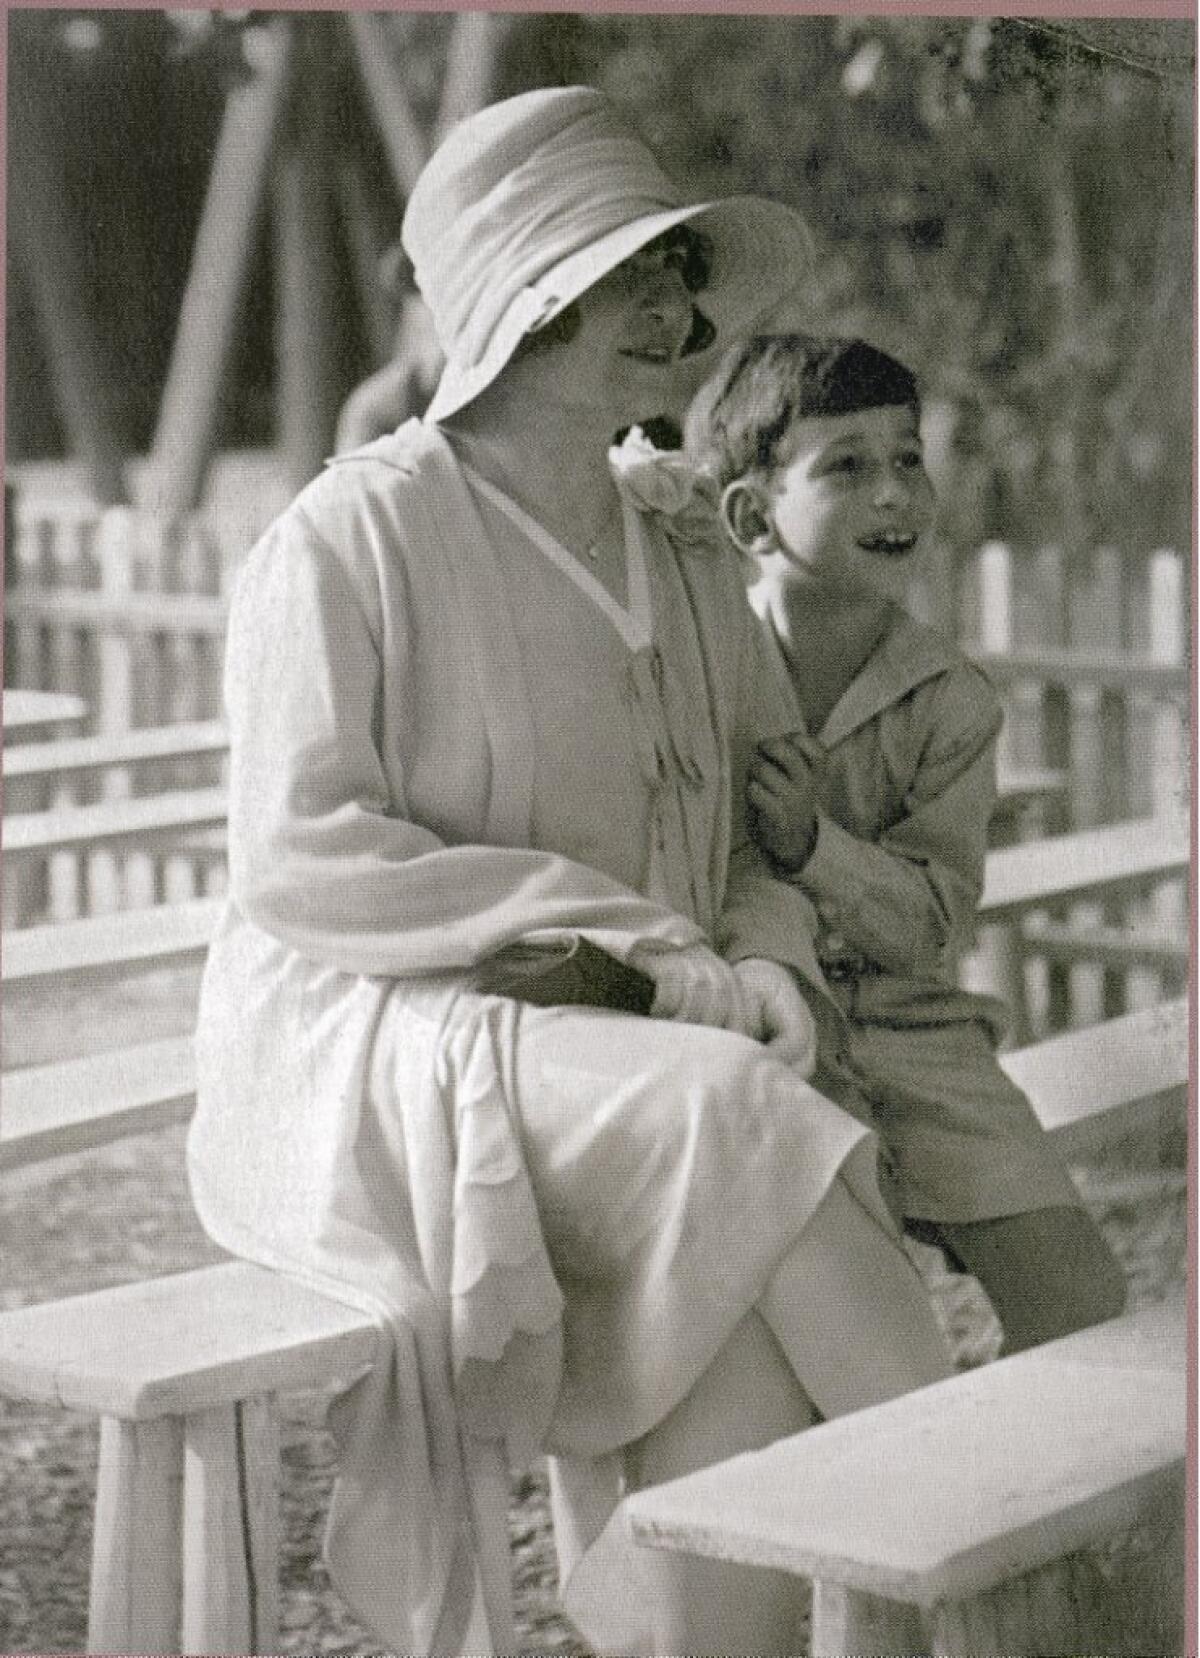 A photo provided by the family of Claude Cassirer as a child with his grandmother, Lilly Cassirer.